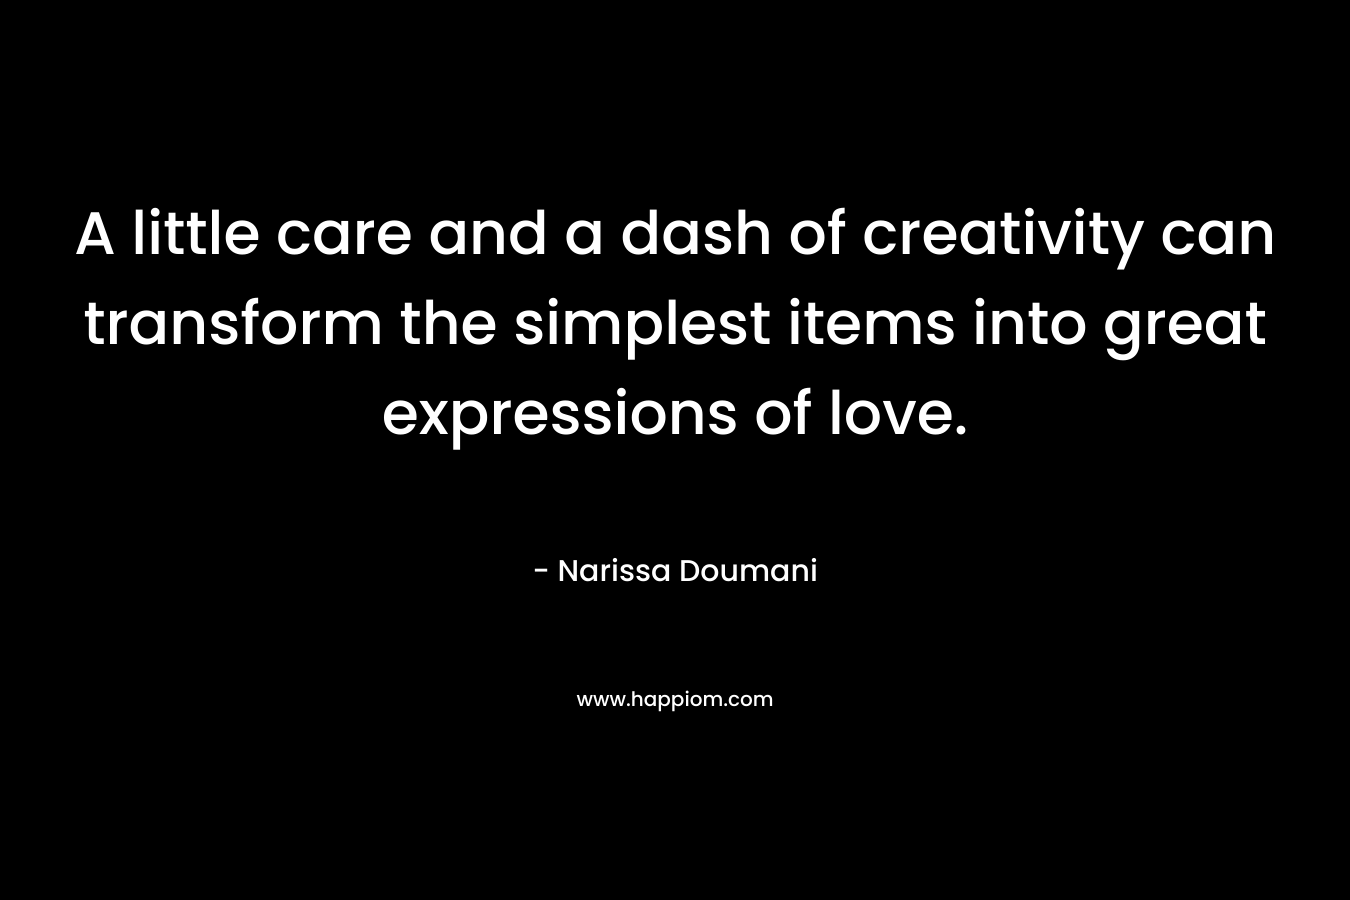 A little care and a dash of creativity can transform the simplest items into great expressions of love.